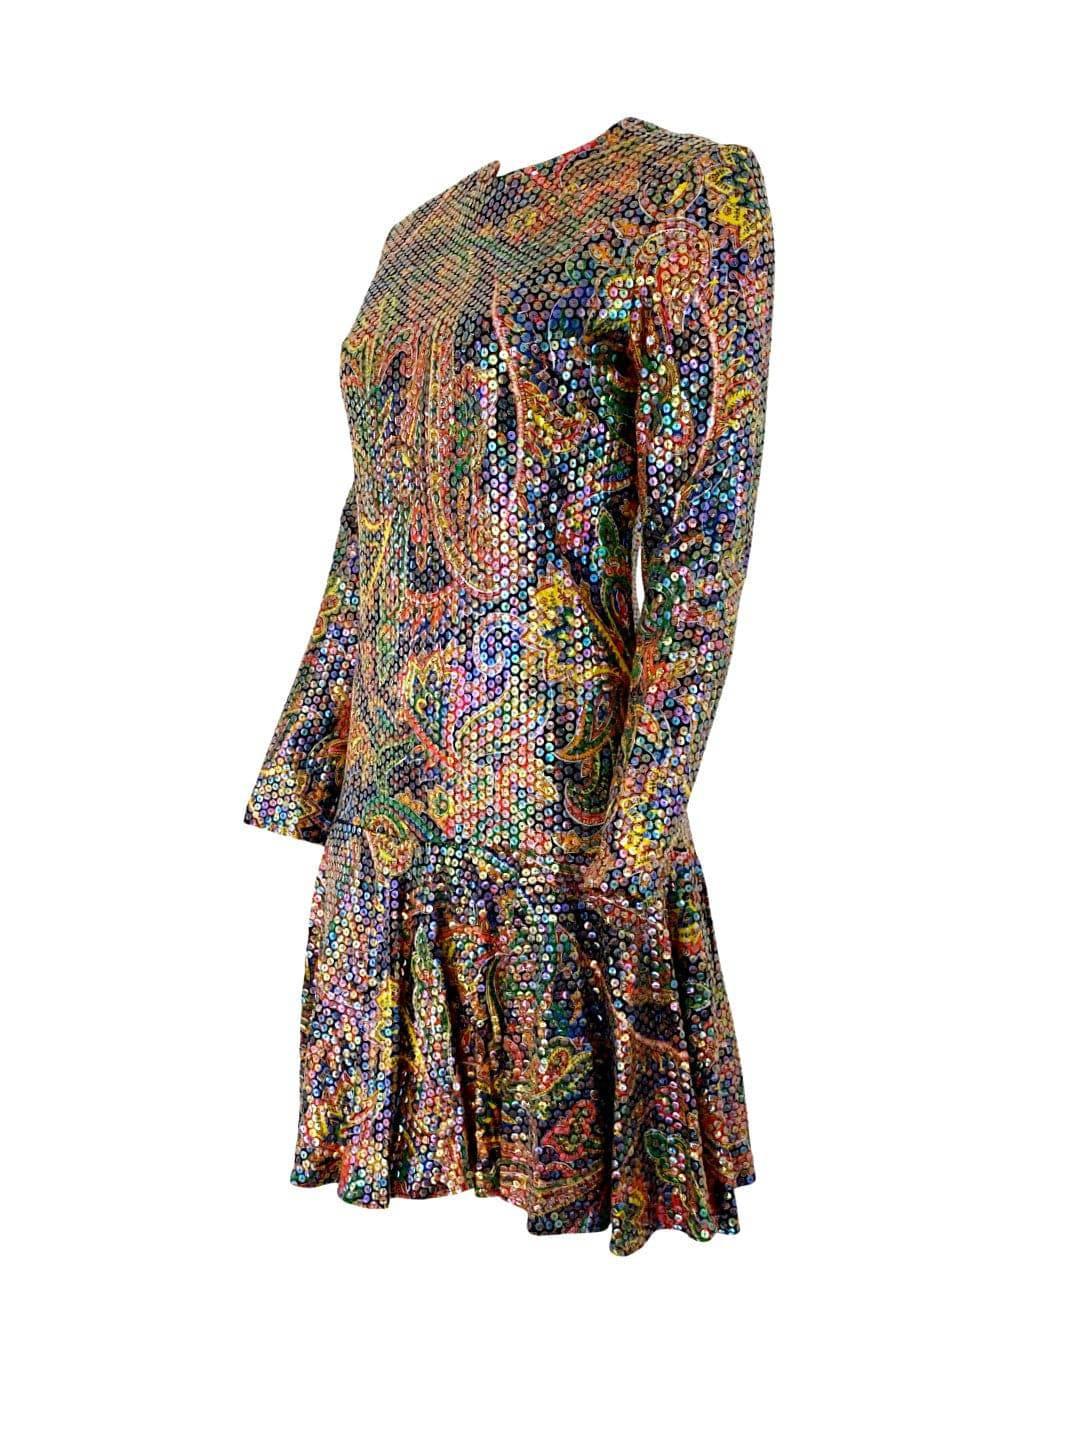 Such a fun cocktail dress! This vintage late 1960s designer Bob Bugnand dress is an explosion of color, with a multi-colored Indian paisley print fabric completely covered in transparent aurora borealis iridescent sequins. The drop waist and short